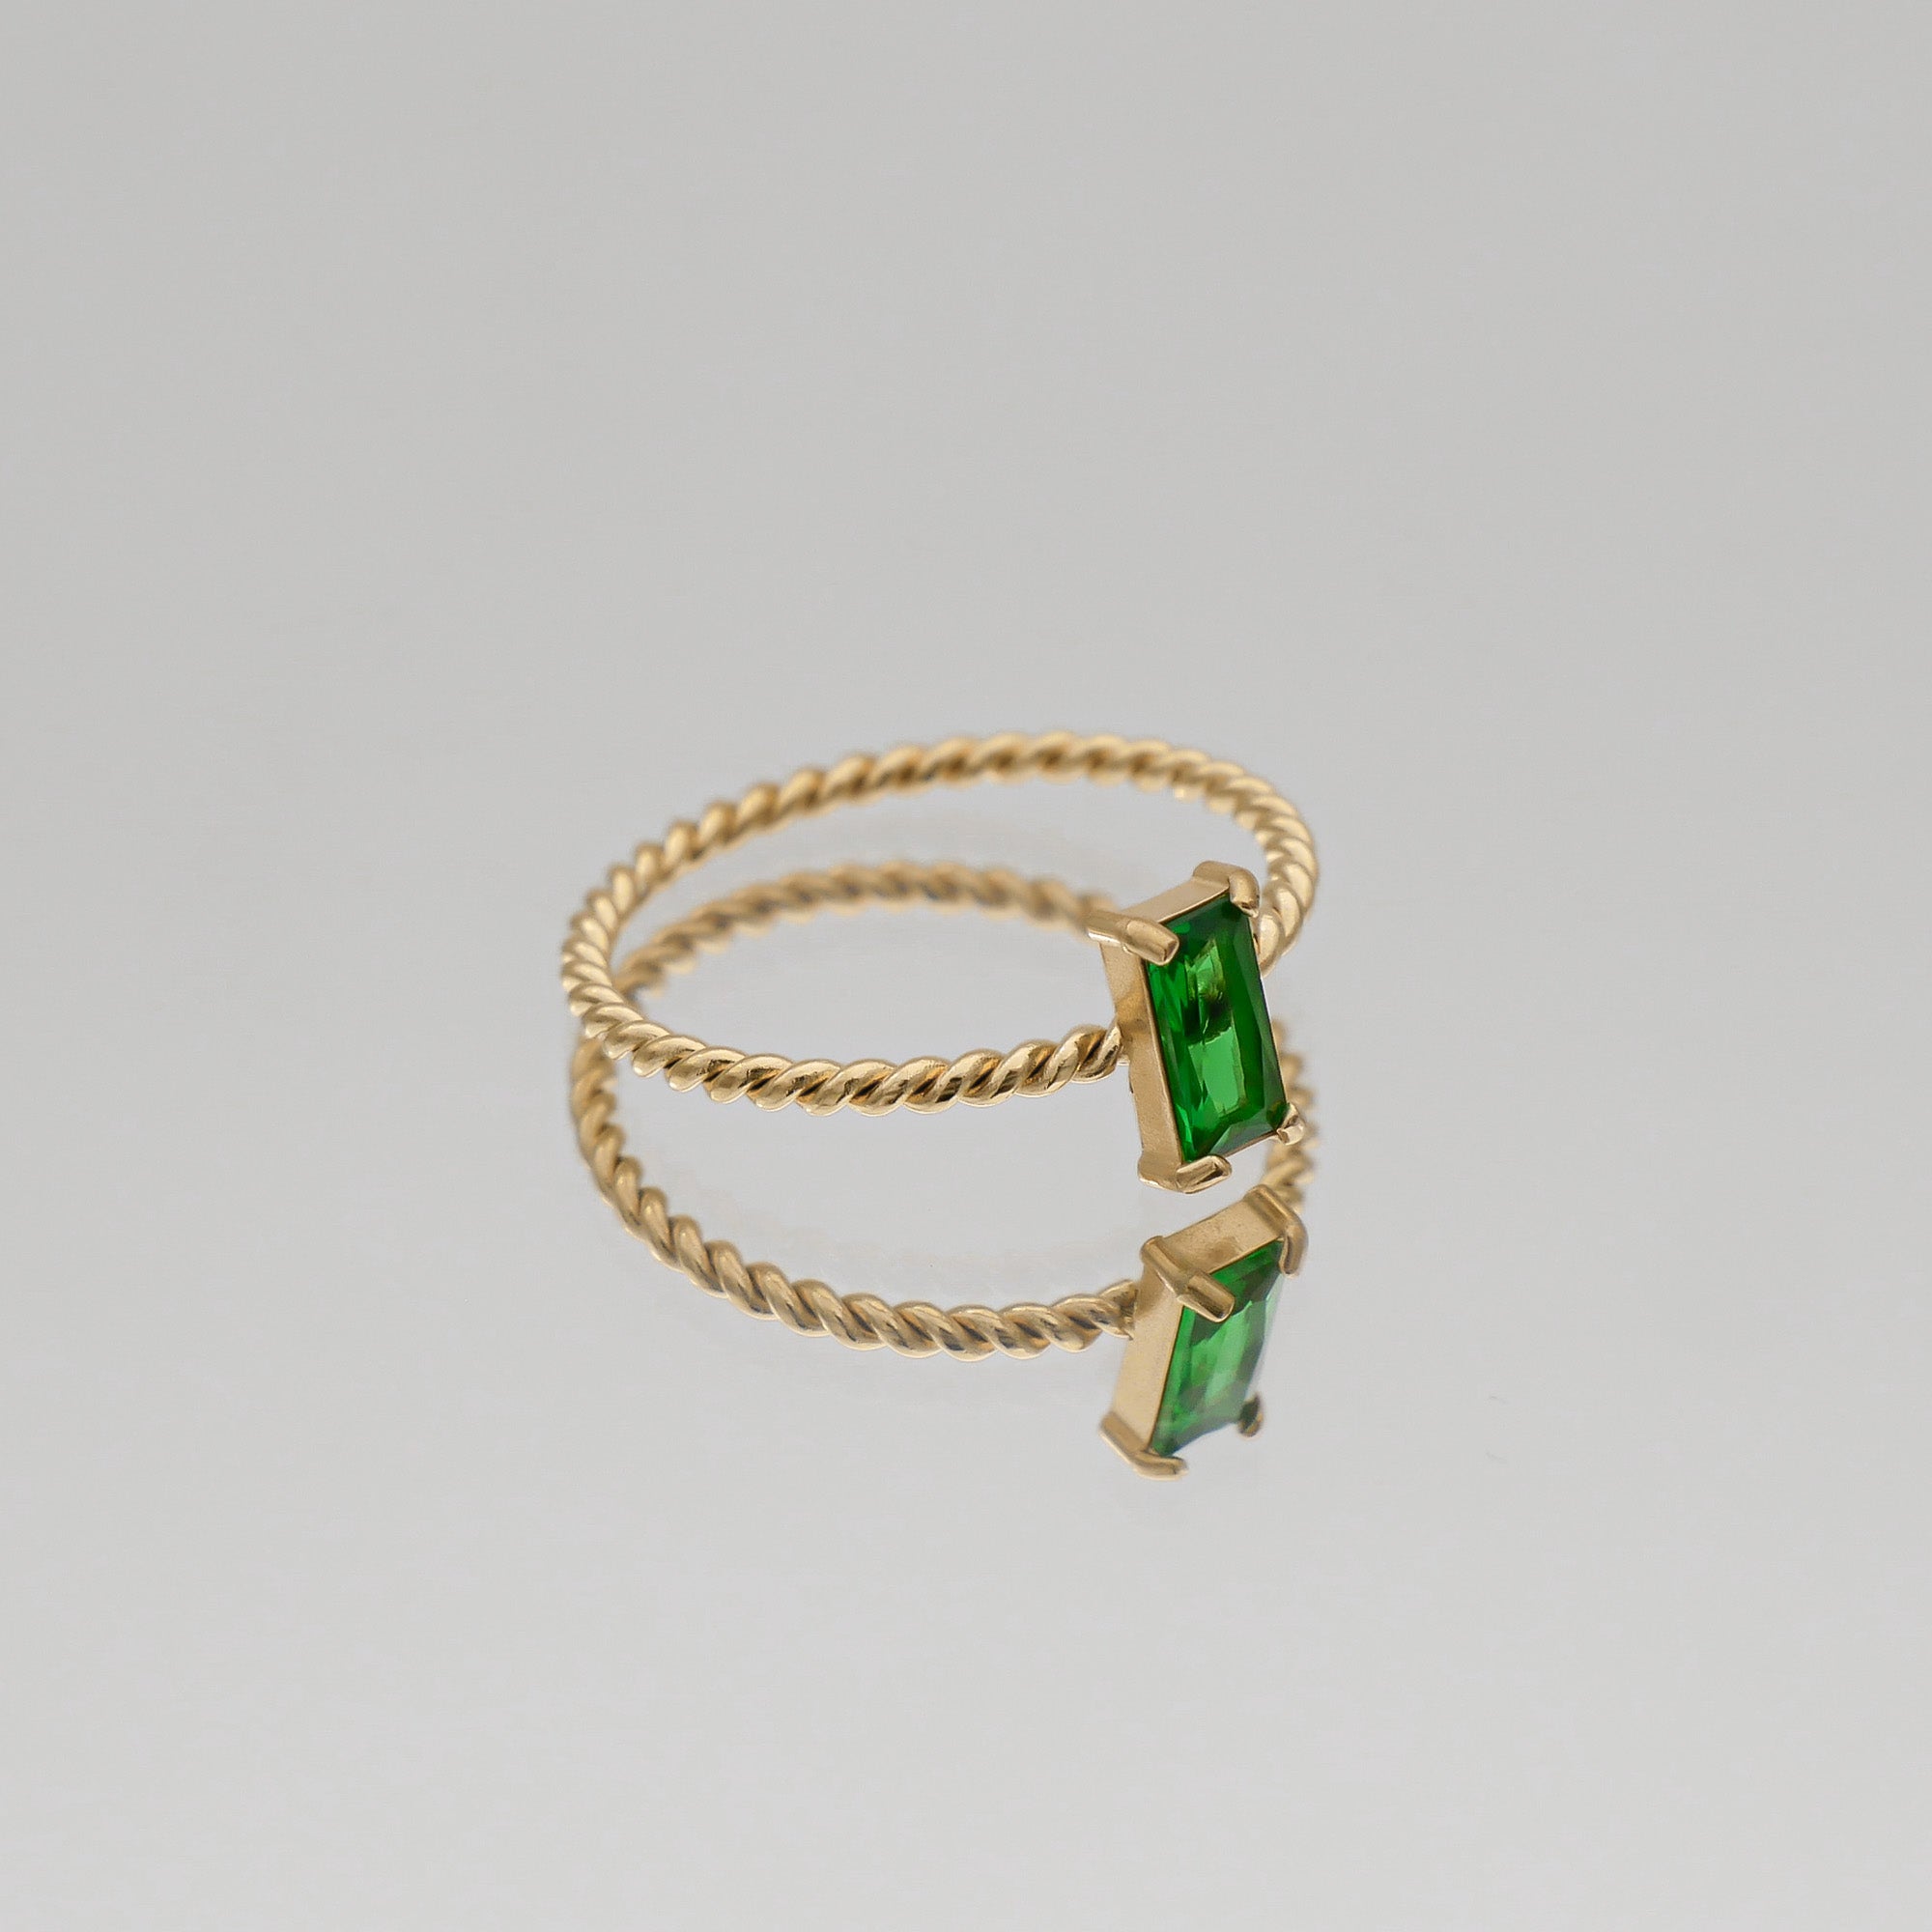 Selin twisted ring in emerald cz